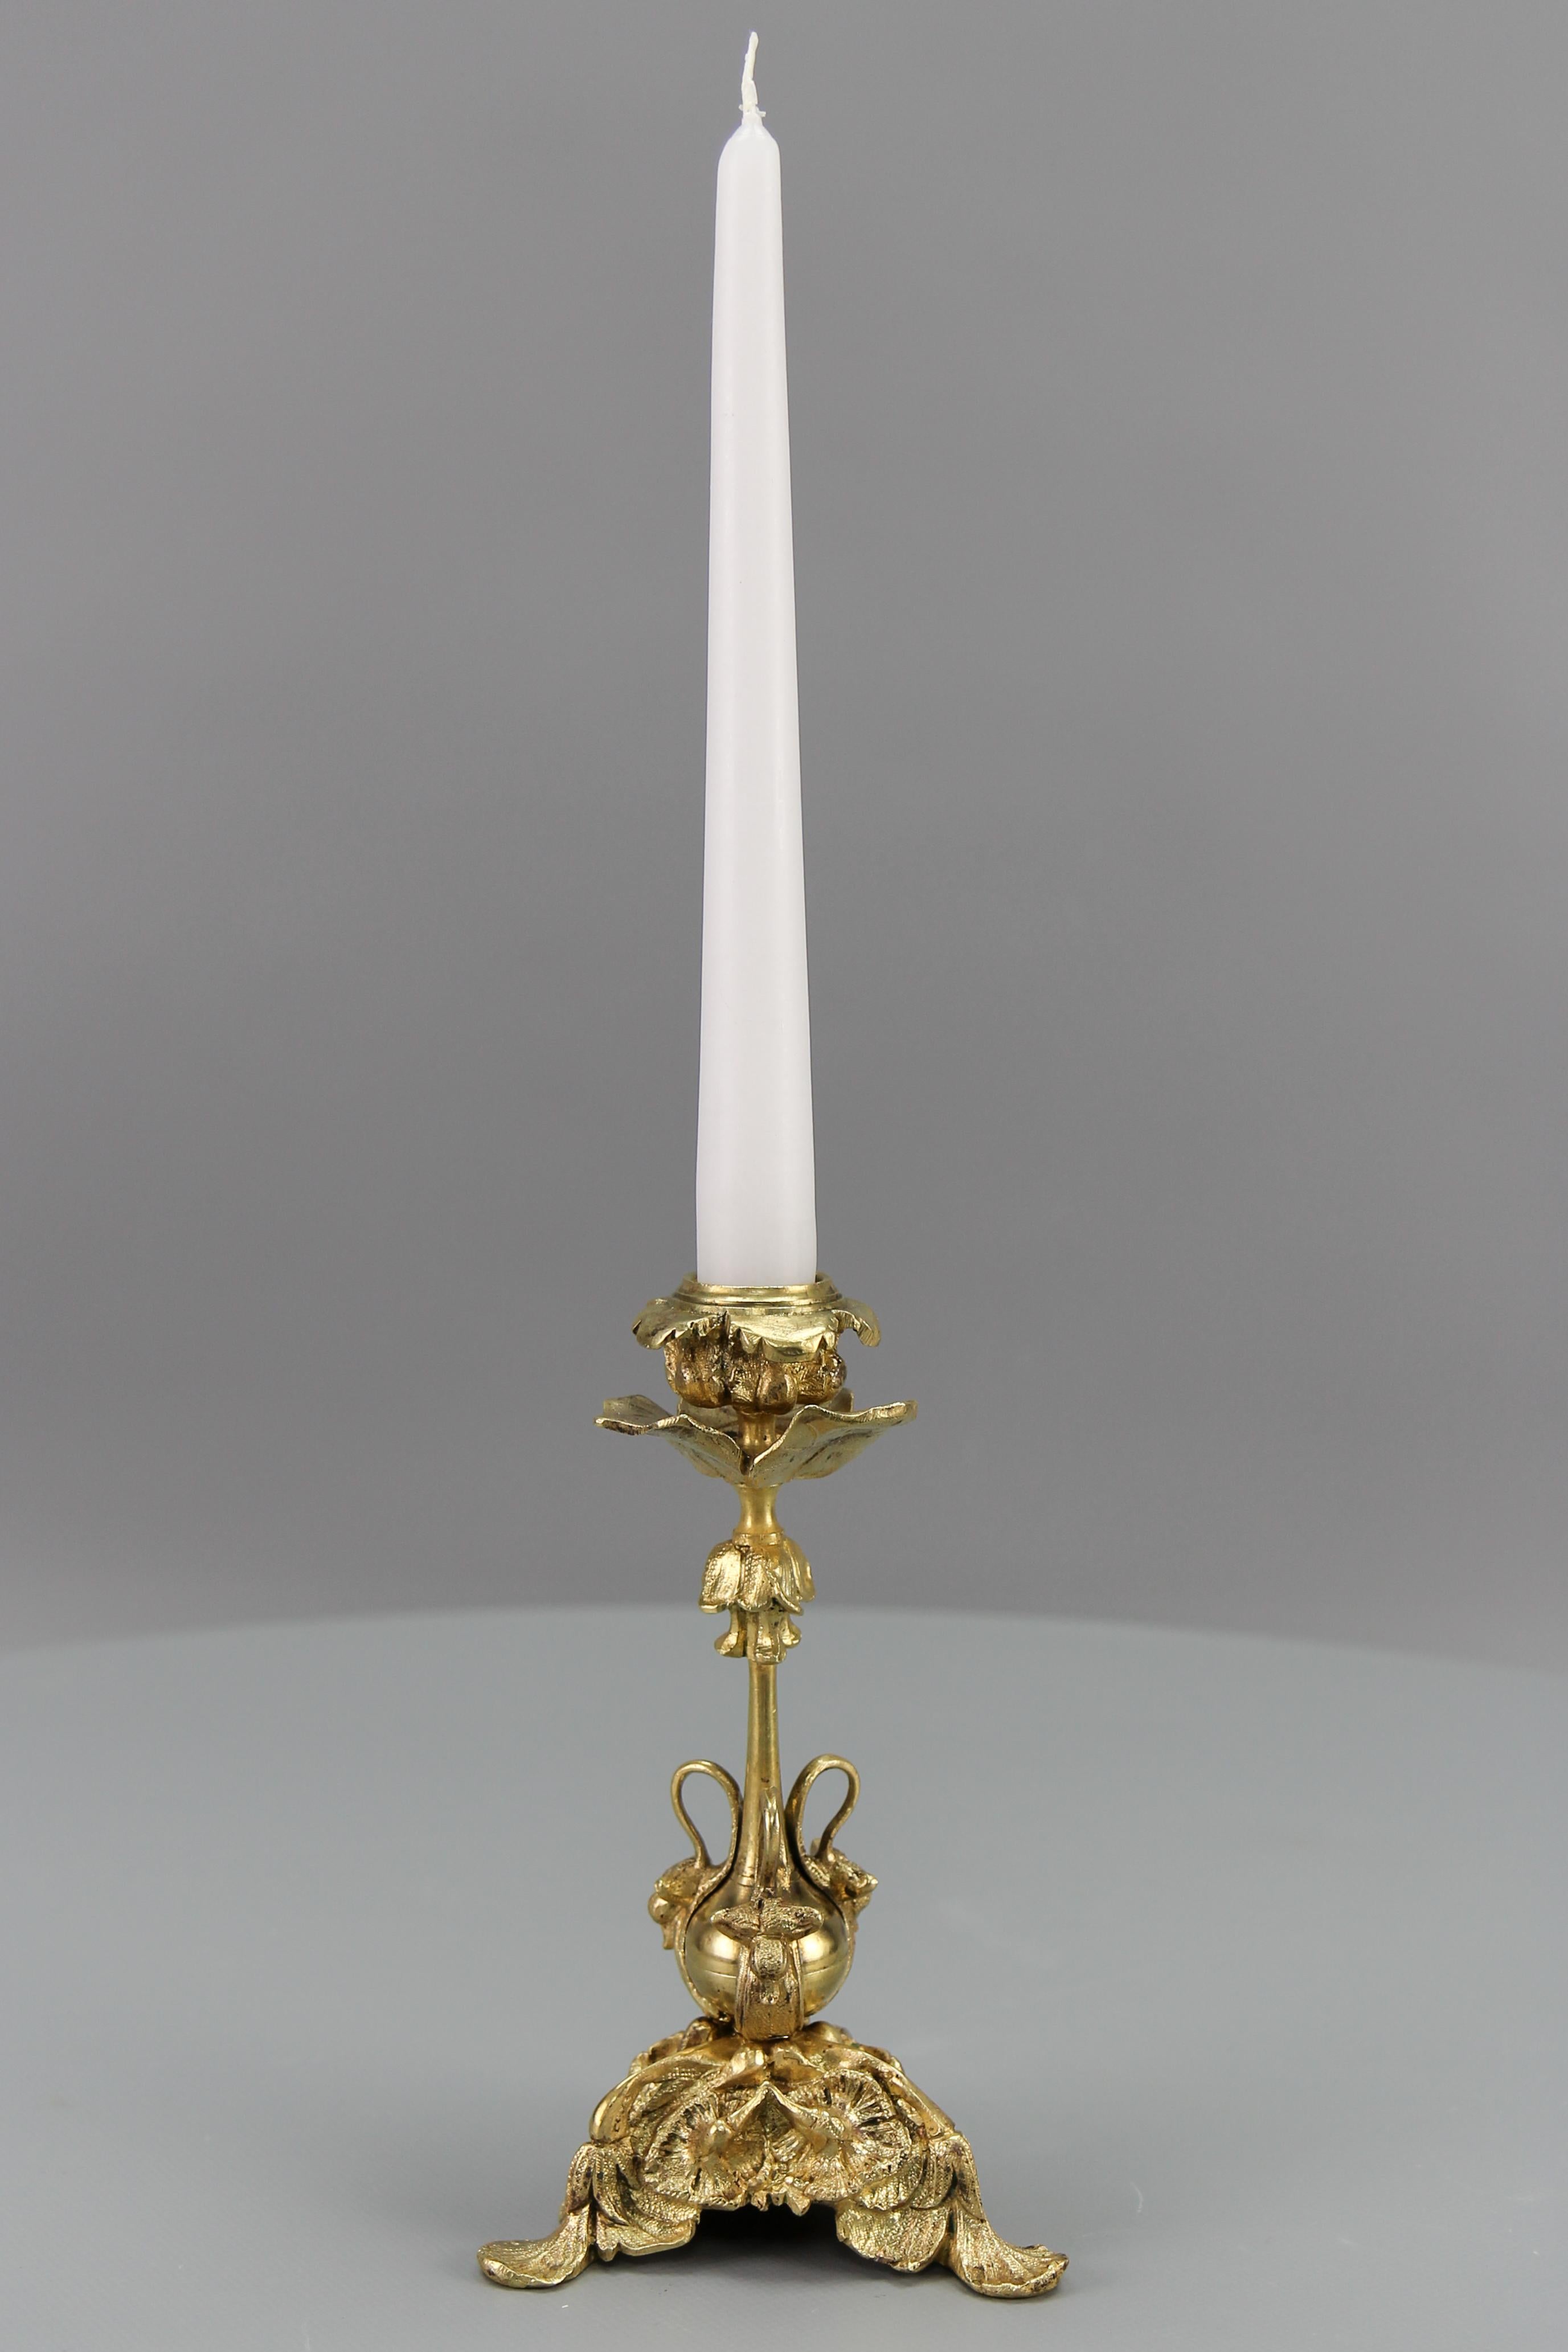 French Rococo style Bronze Candlestick, circa the 1920s
Beautiful and ornate Rococo or Louis XV-style bronze candlestick, France, circa the 1920s.
Dimensions: height: 19 cm / 7.48 in; width: 11 cm / 4.33 in, depth: 11 cm / 4.33 in.
In good